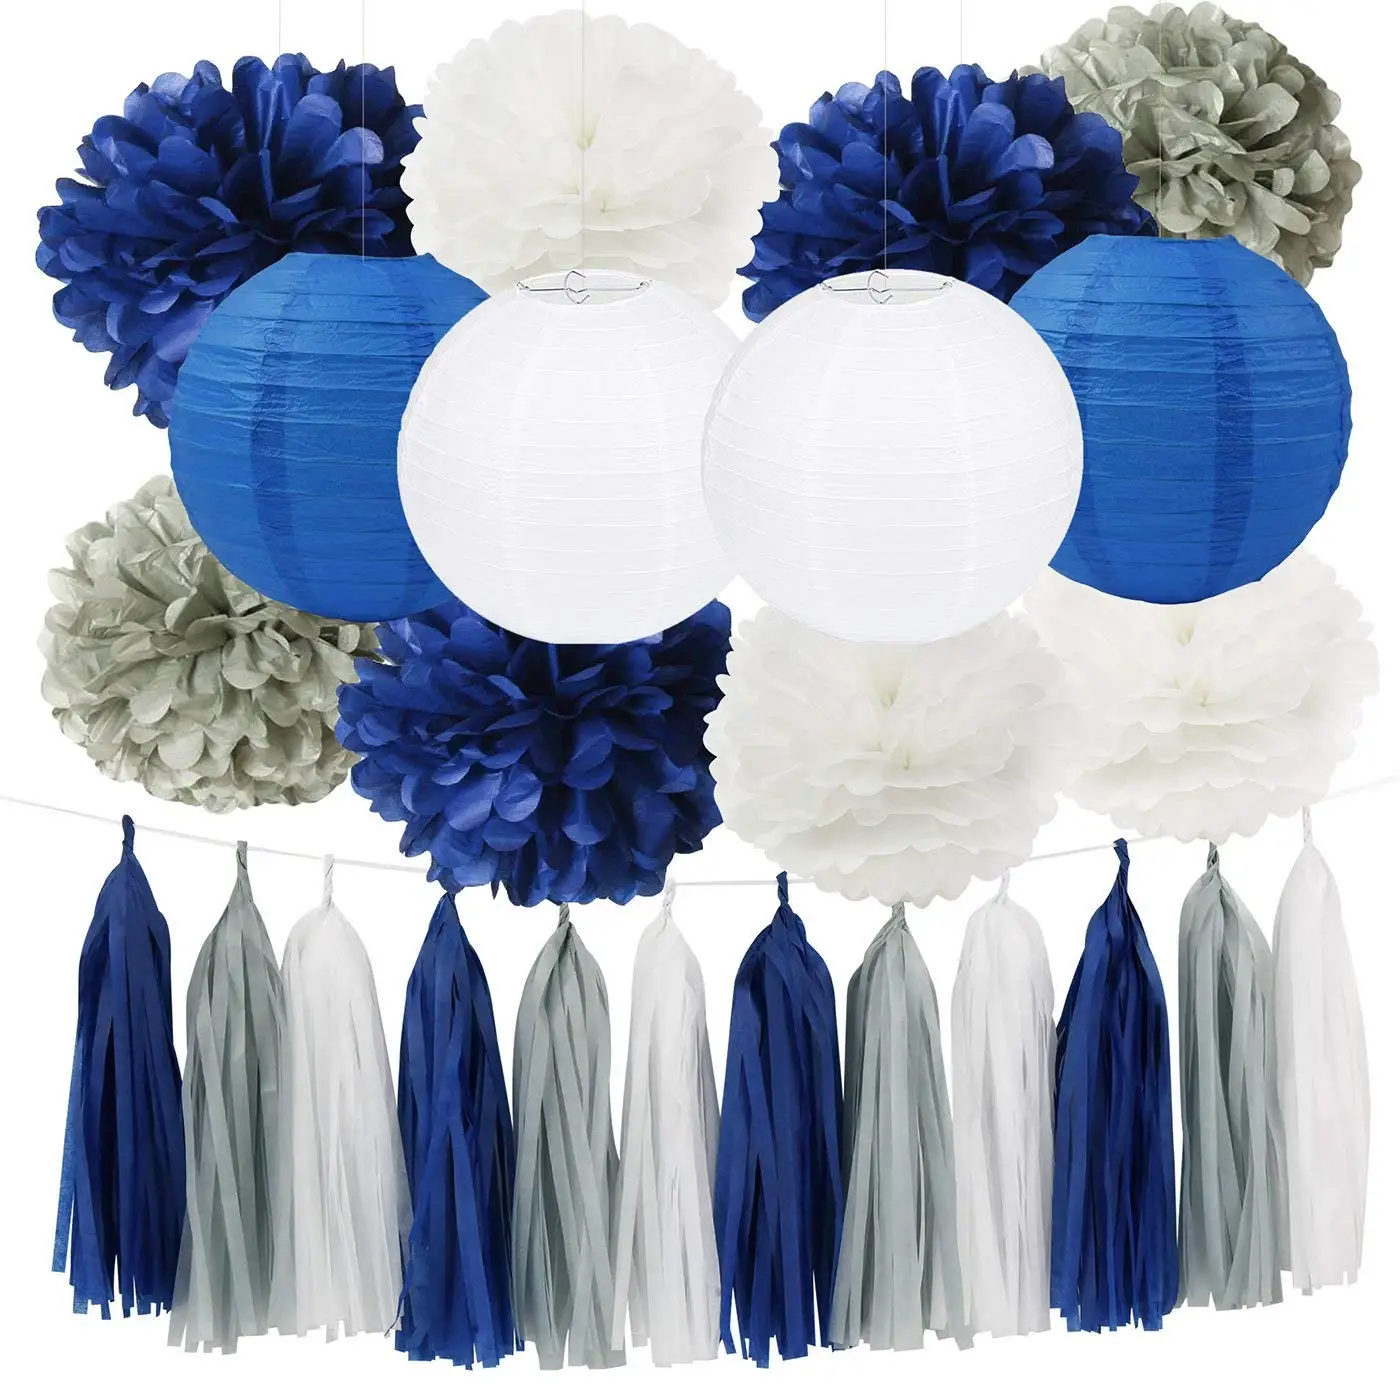 navy and gray baby shower decorations